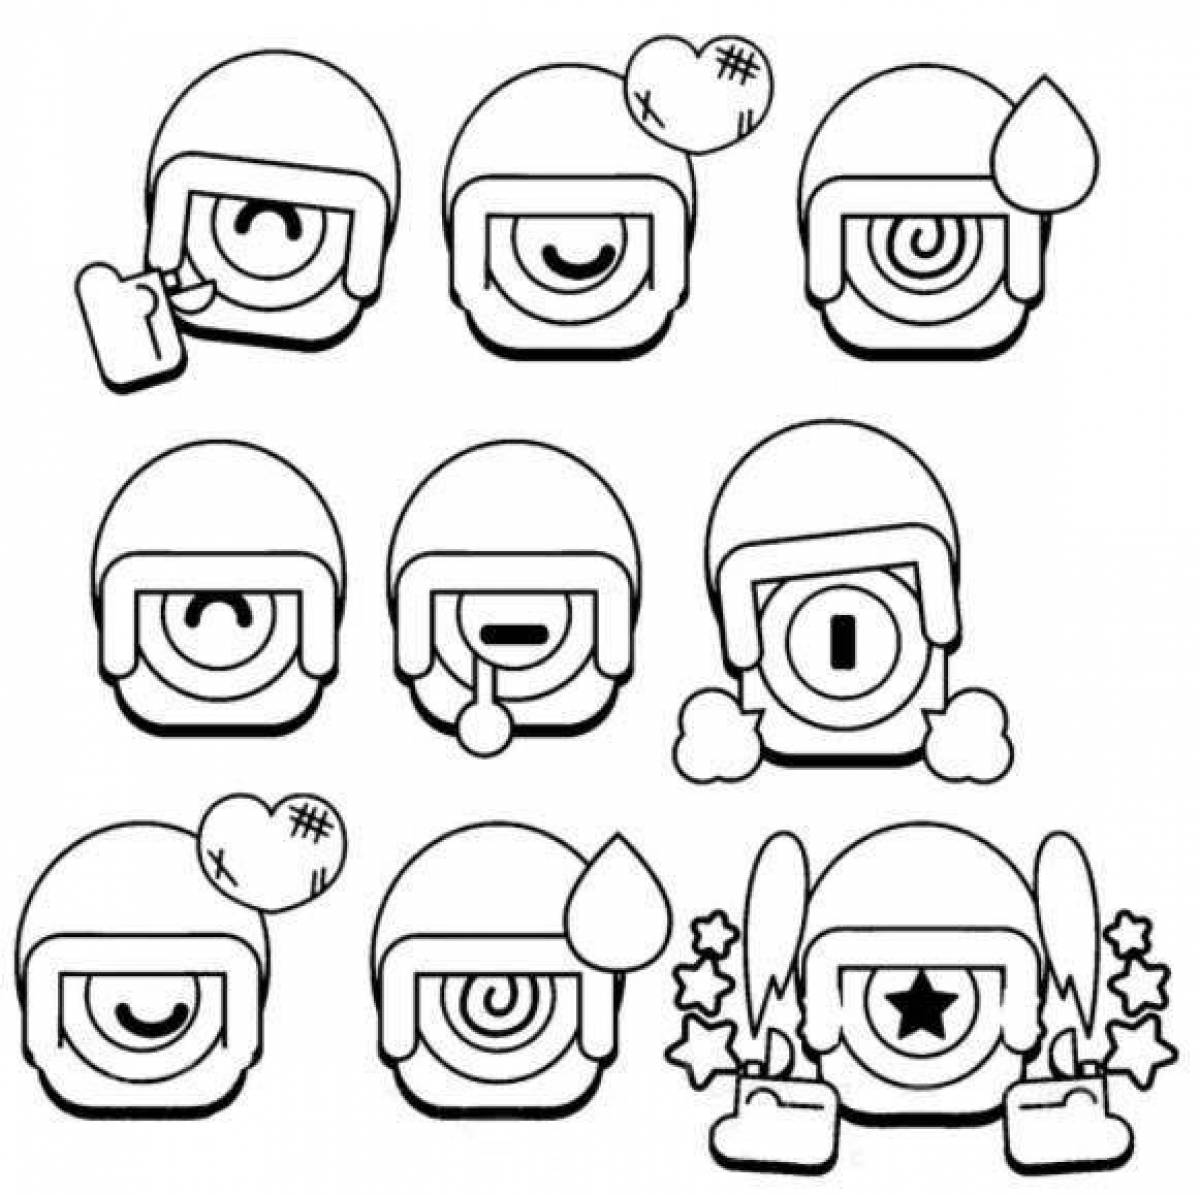 Elegant coloring page icons from brawl stars